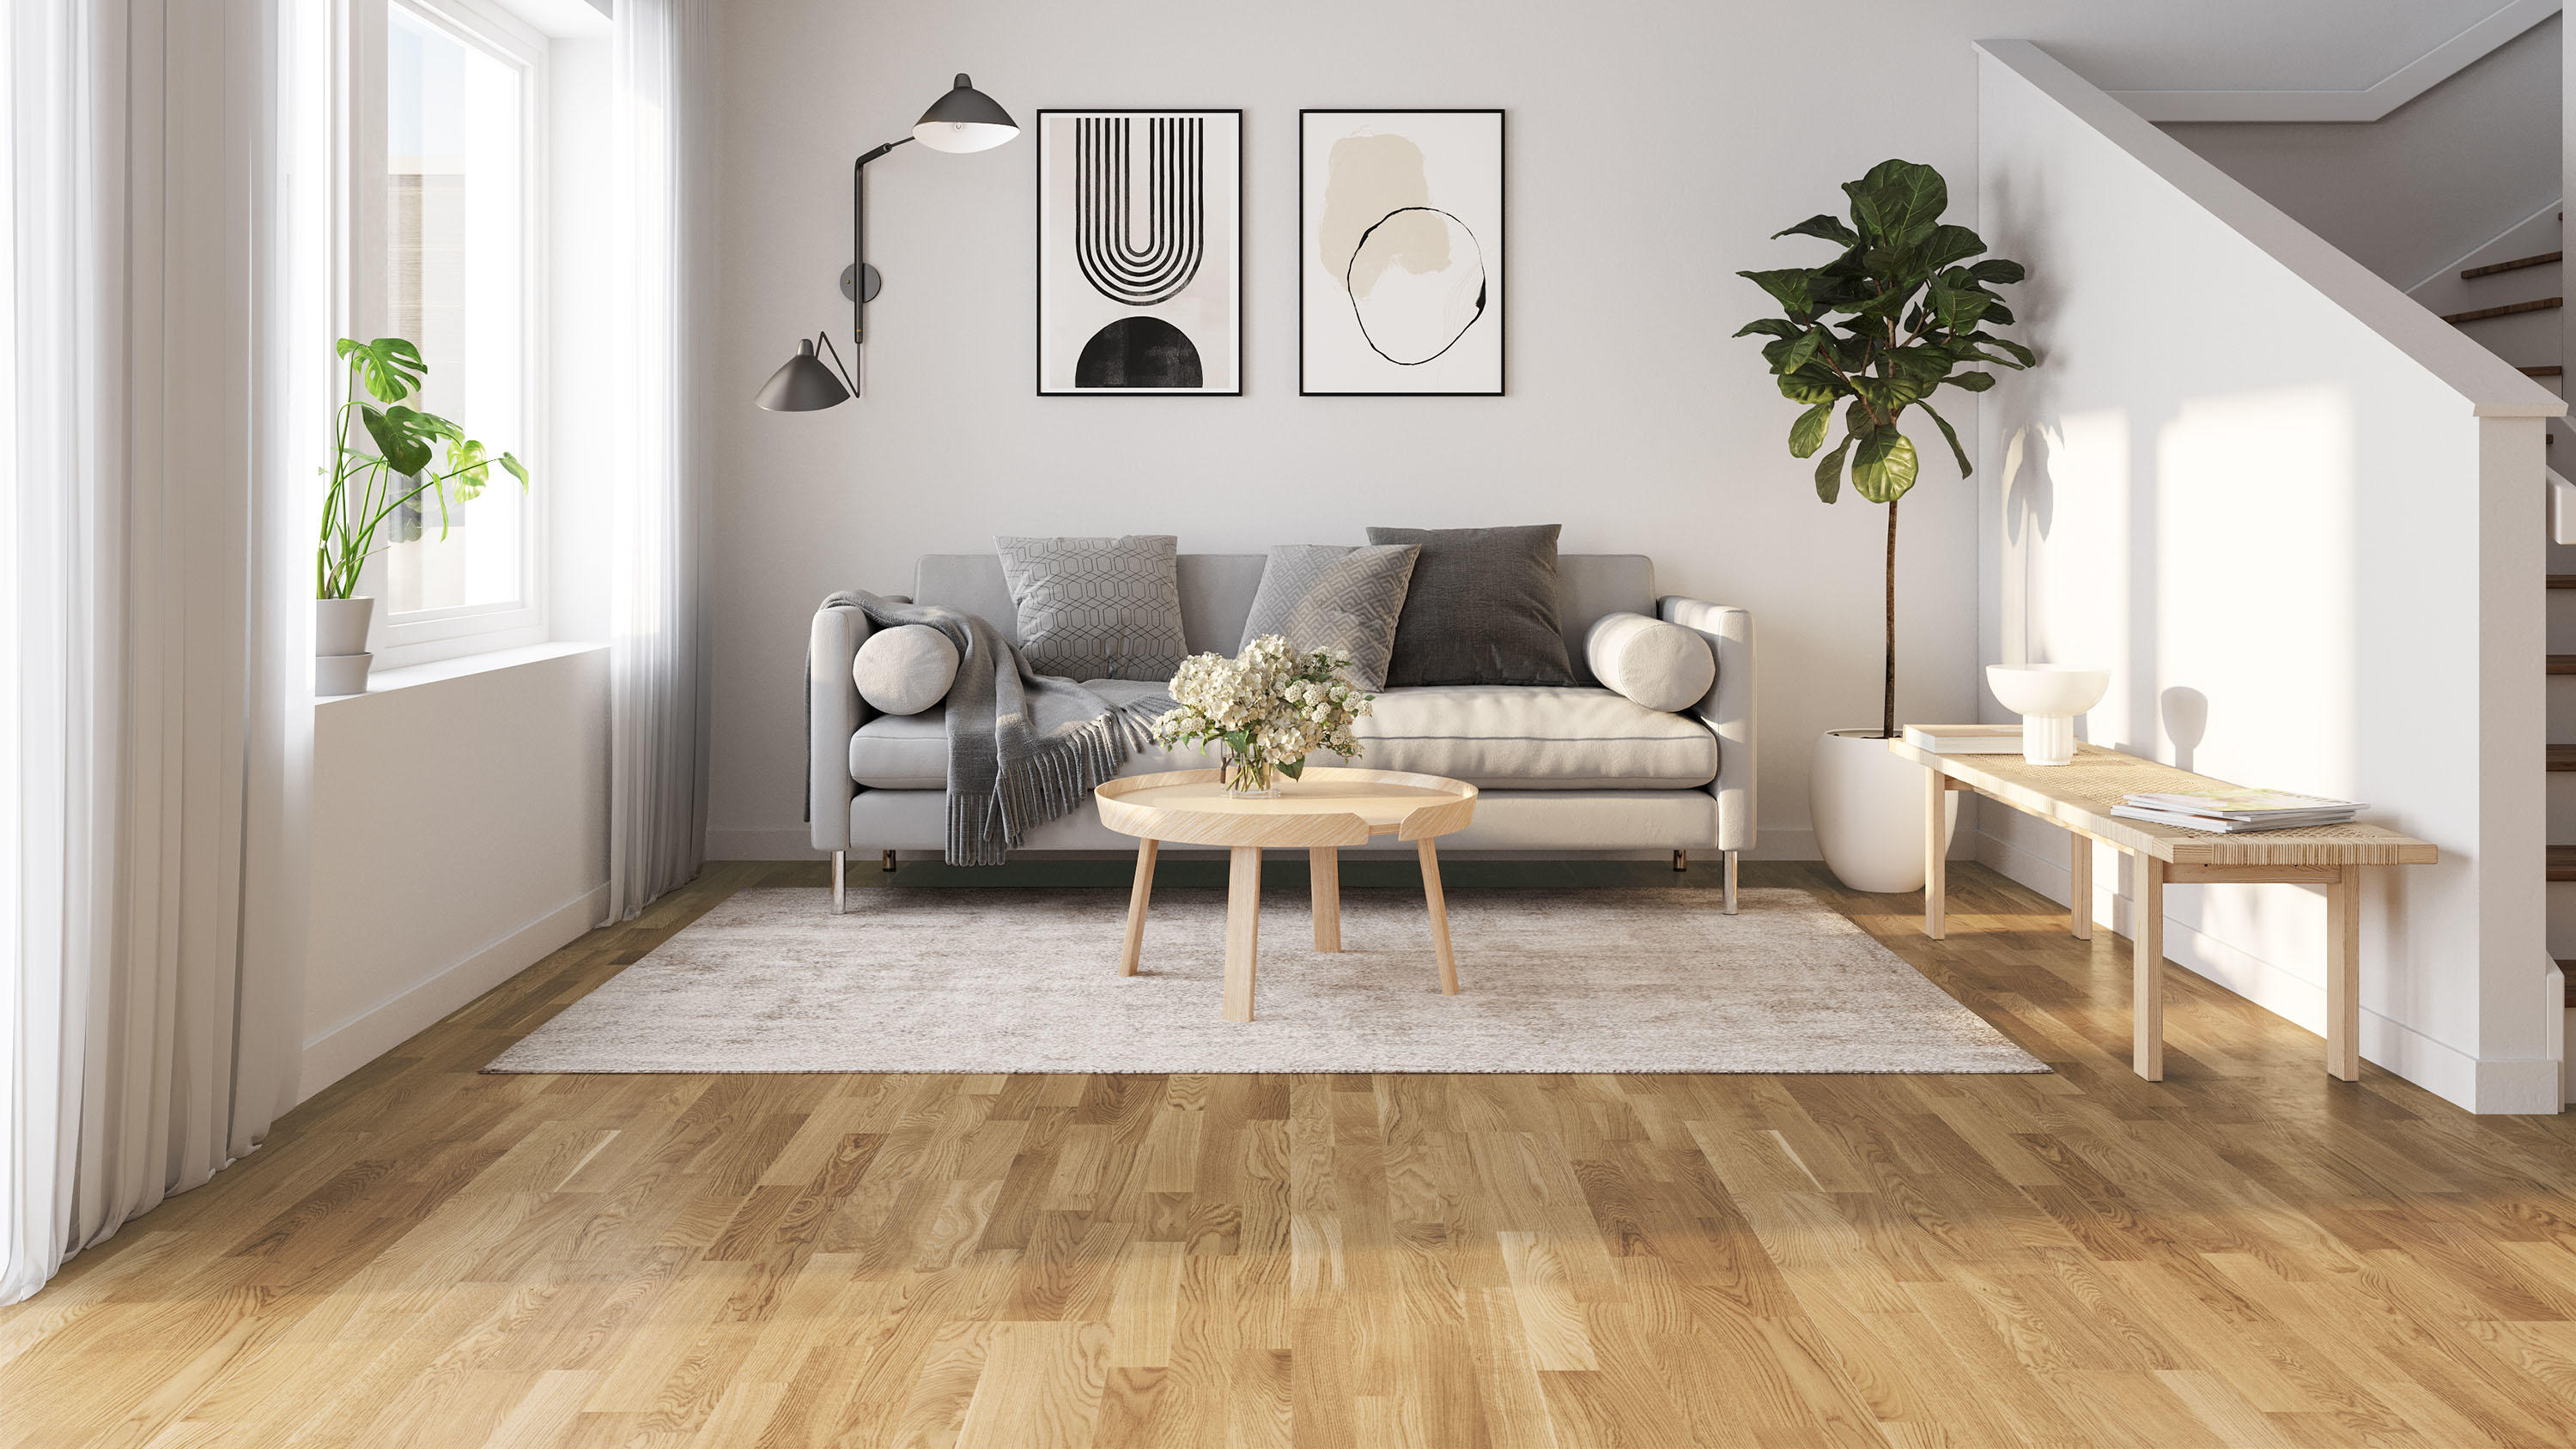 Klemme lyd afstand Pure natural wood floors - Commercial flooring - Tarkett